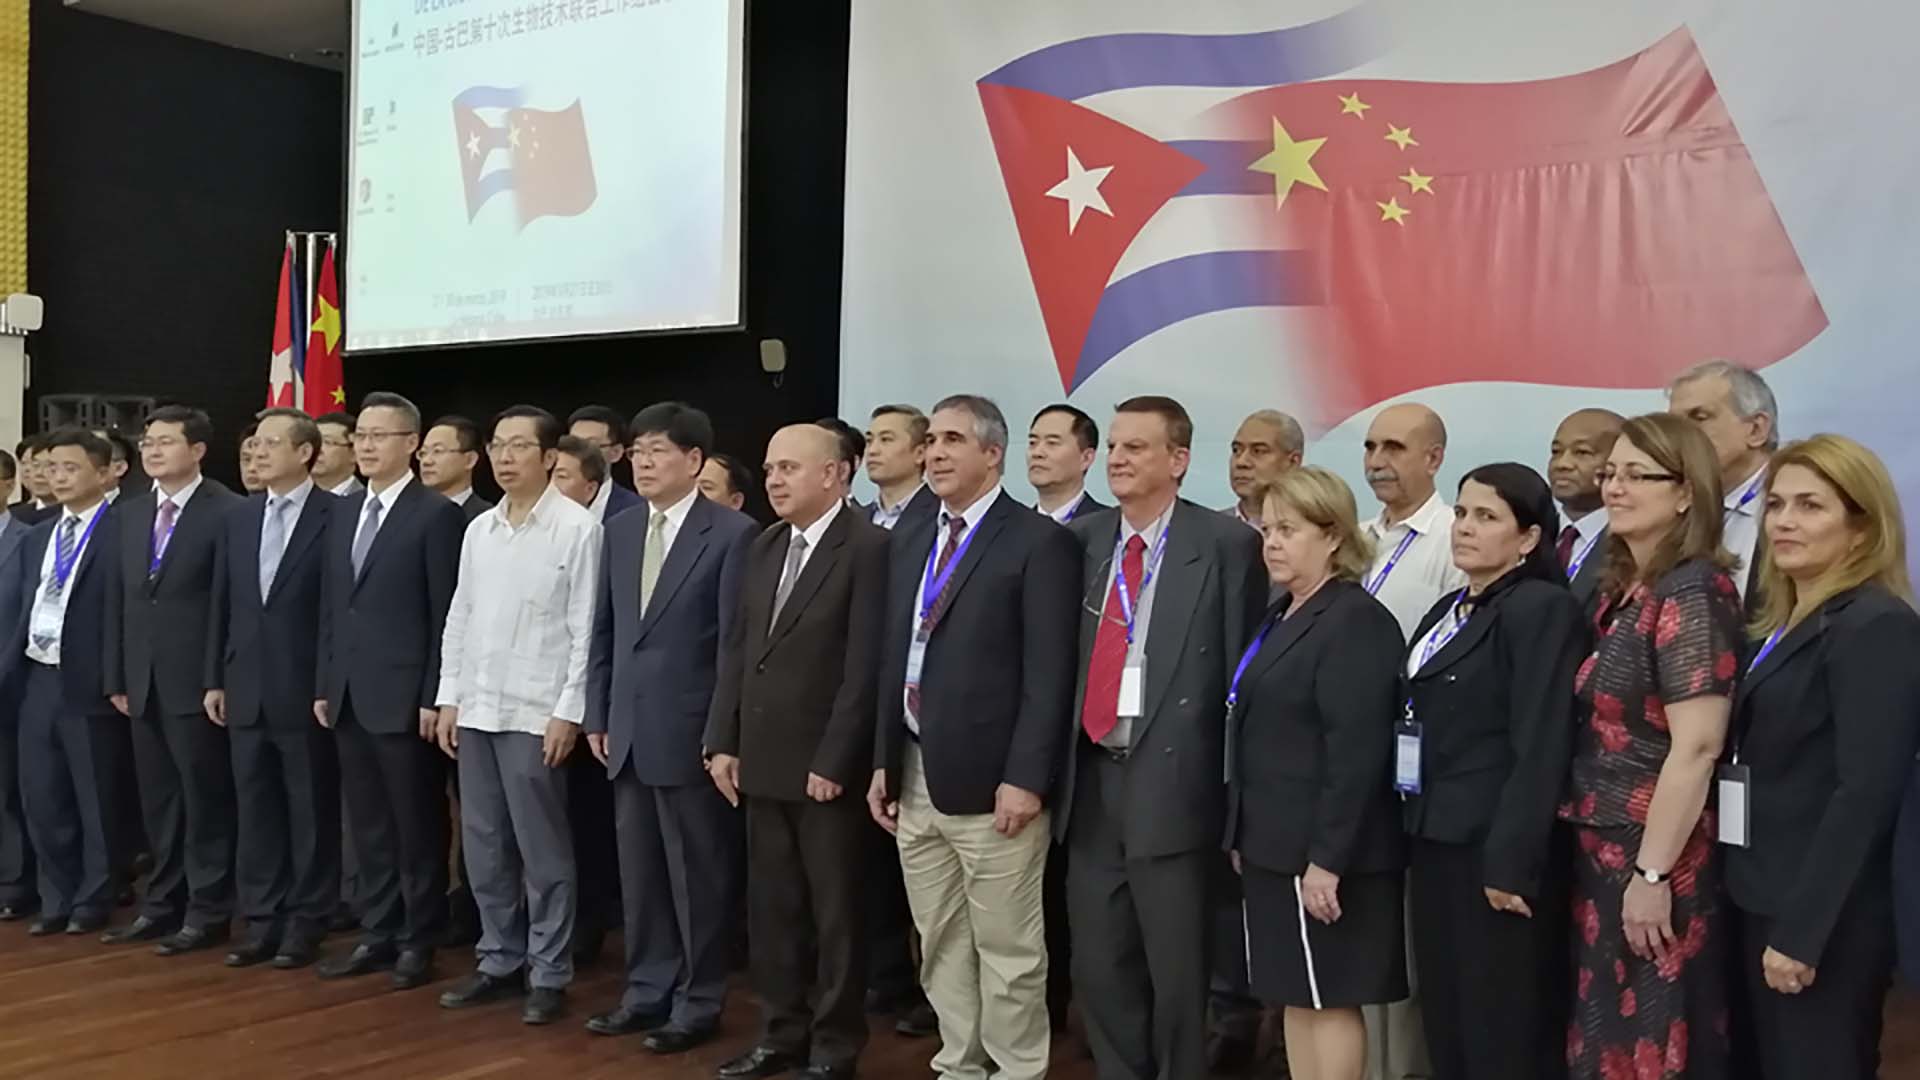 China and Cuba look to enhance cooperation in biotech and pharmaceuticals